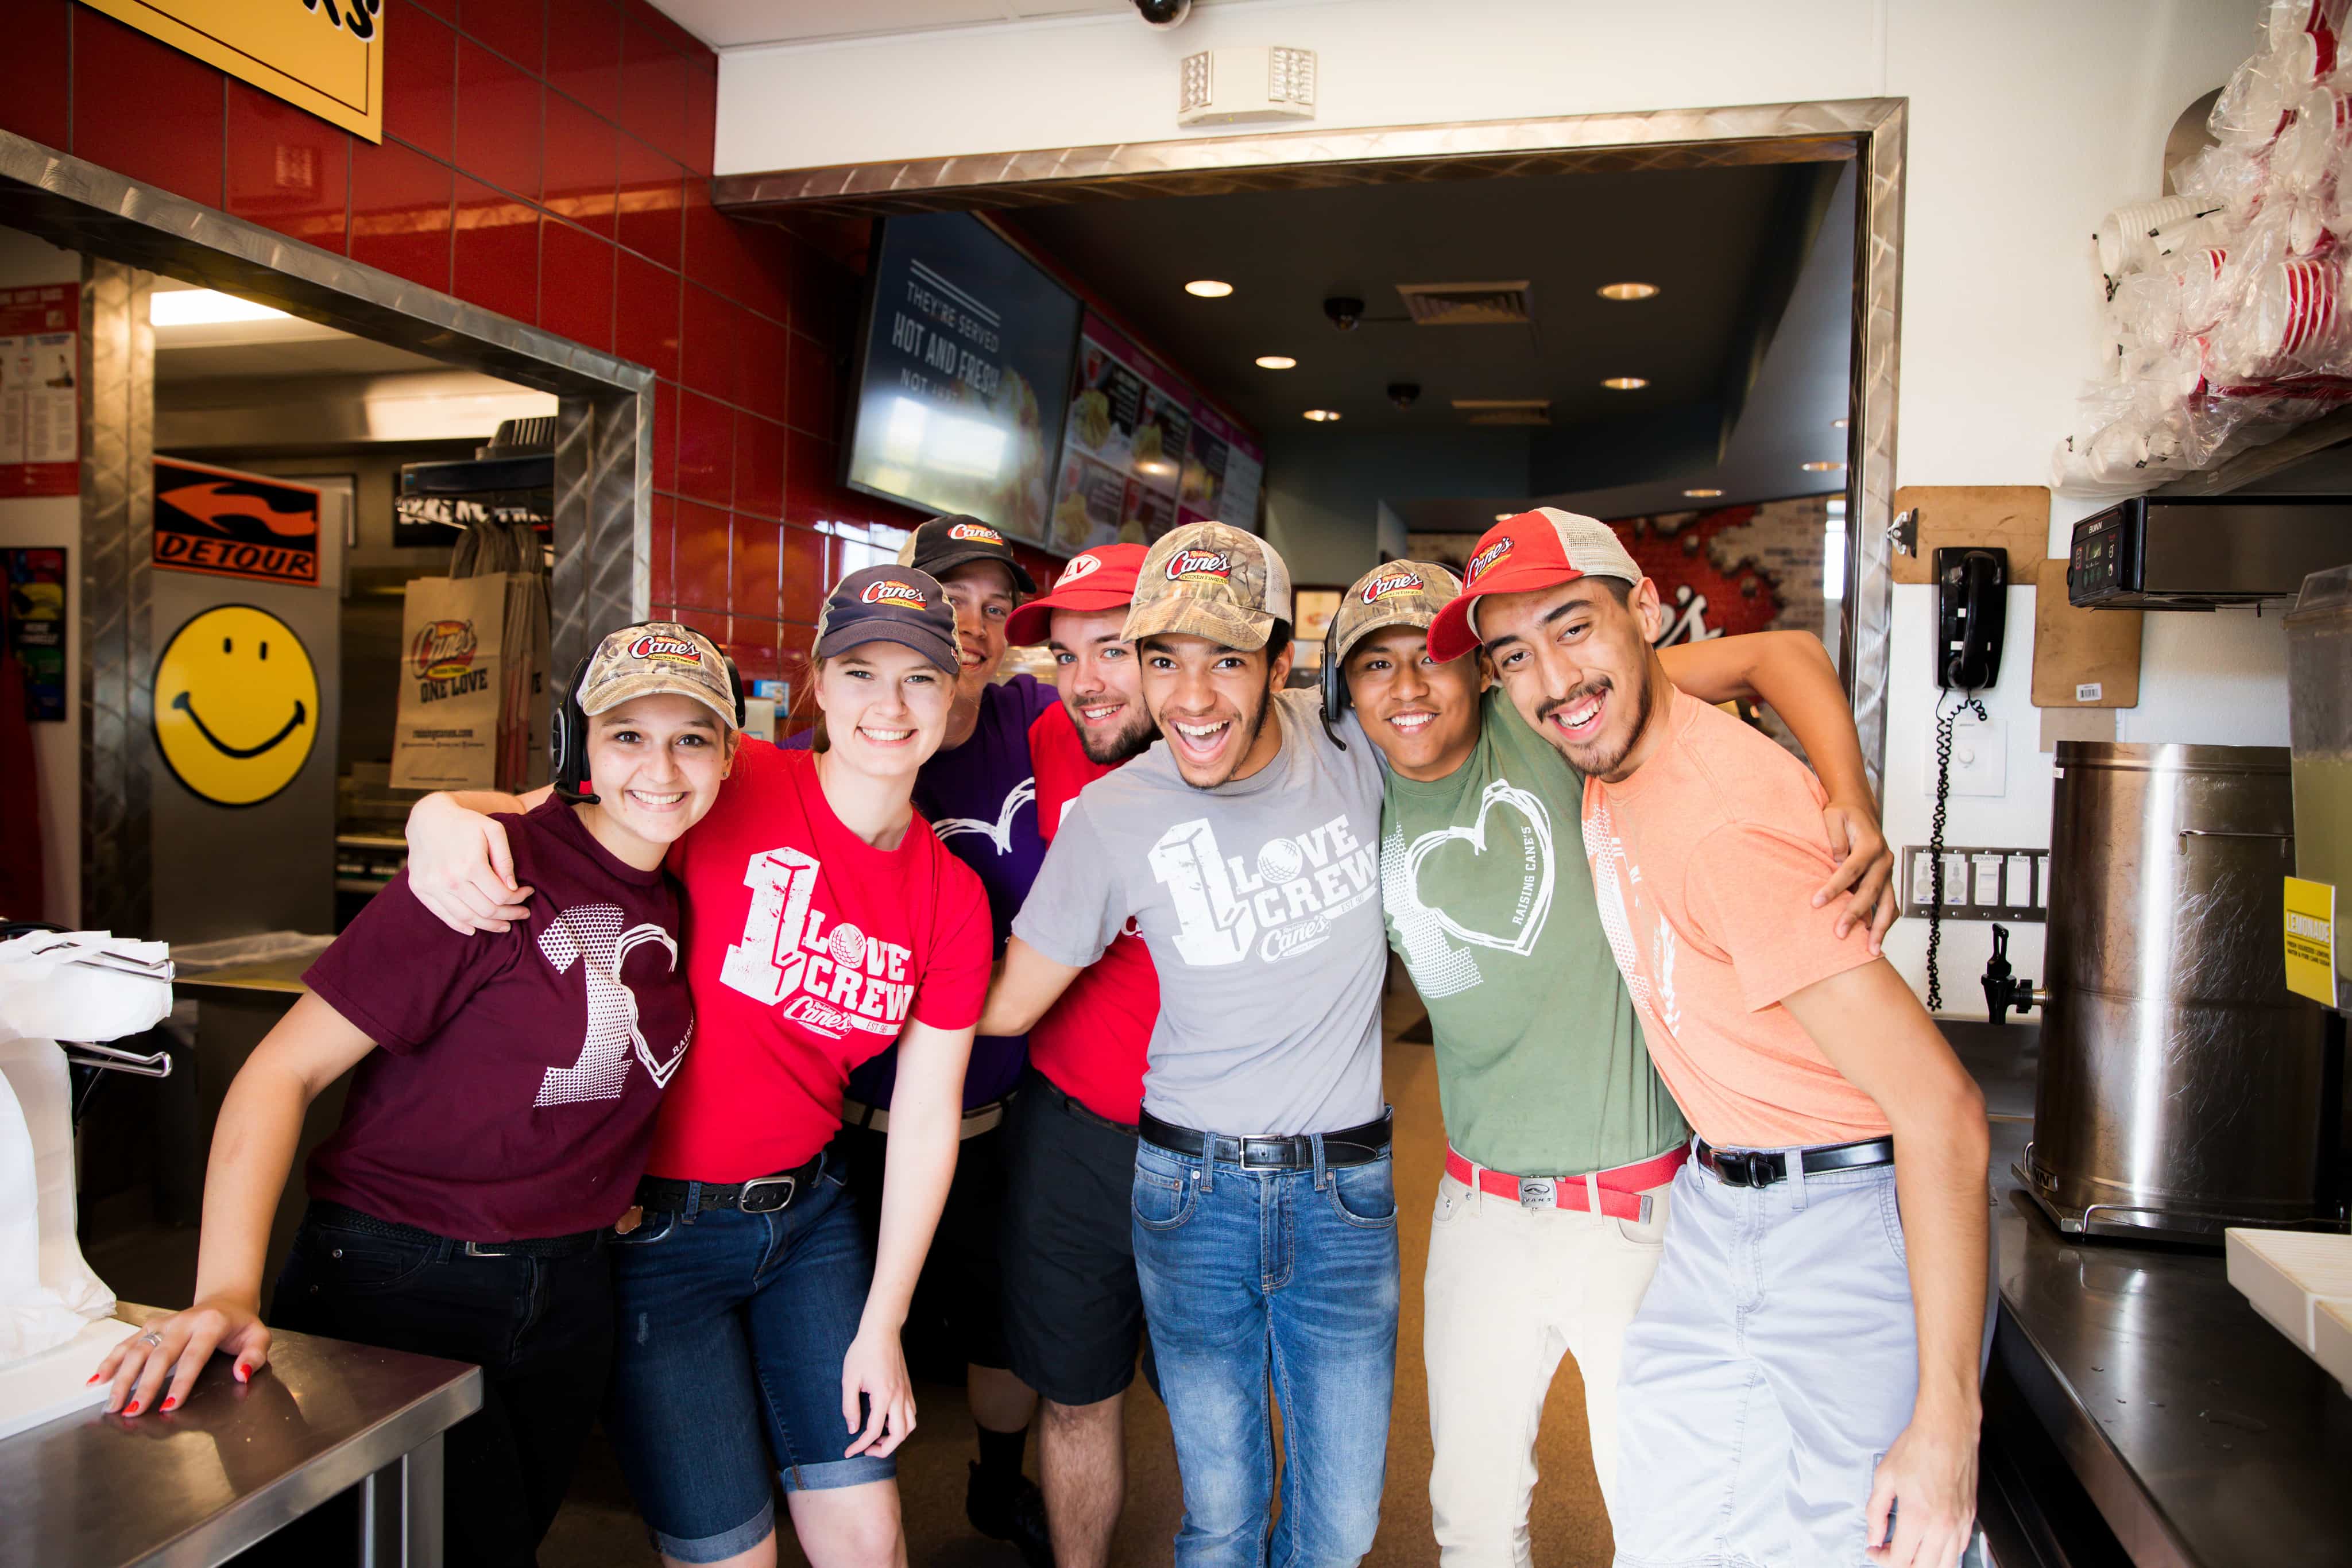 a group of people posing for a picture in a restaurant